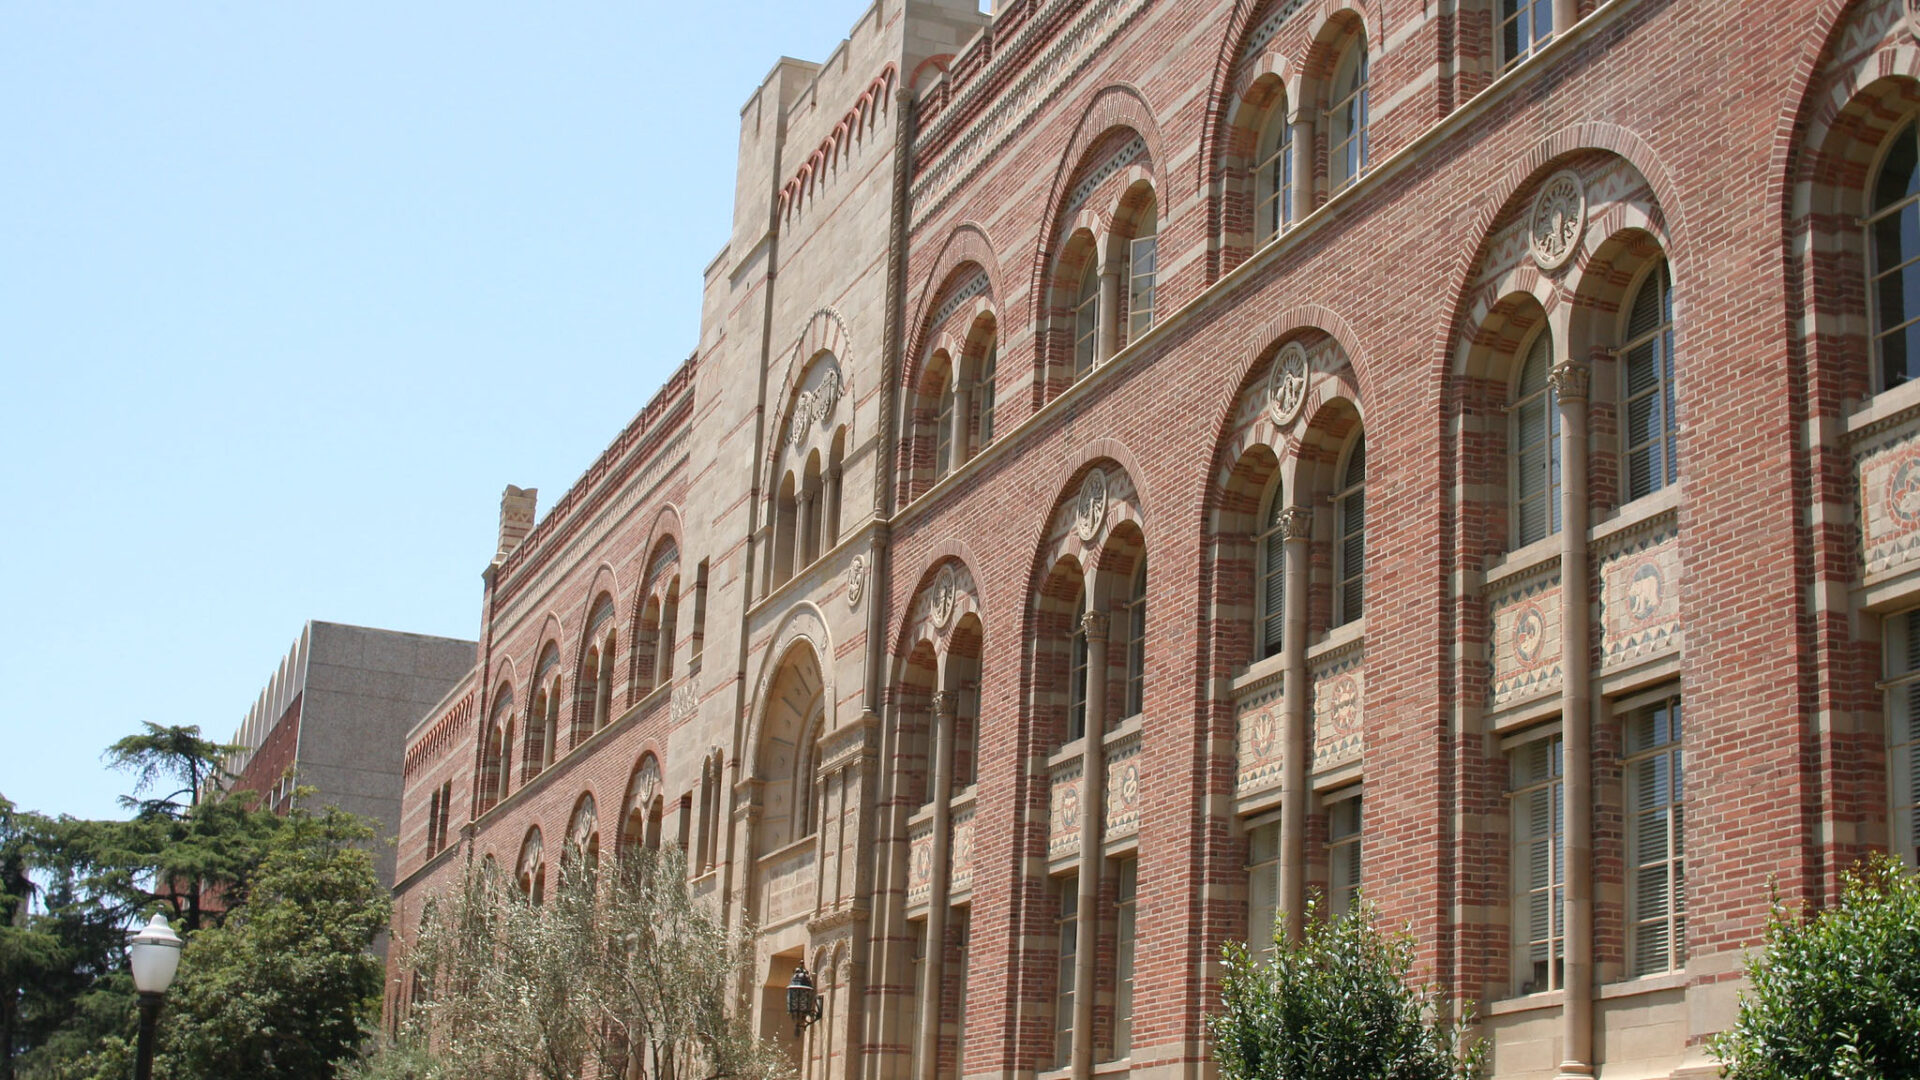 The brick exterior of a University of California, Los Angeles building. Trees line the lower wall. 